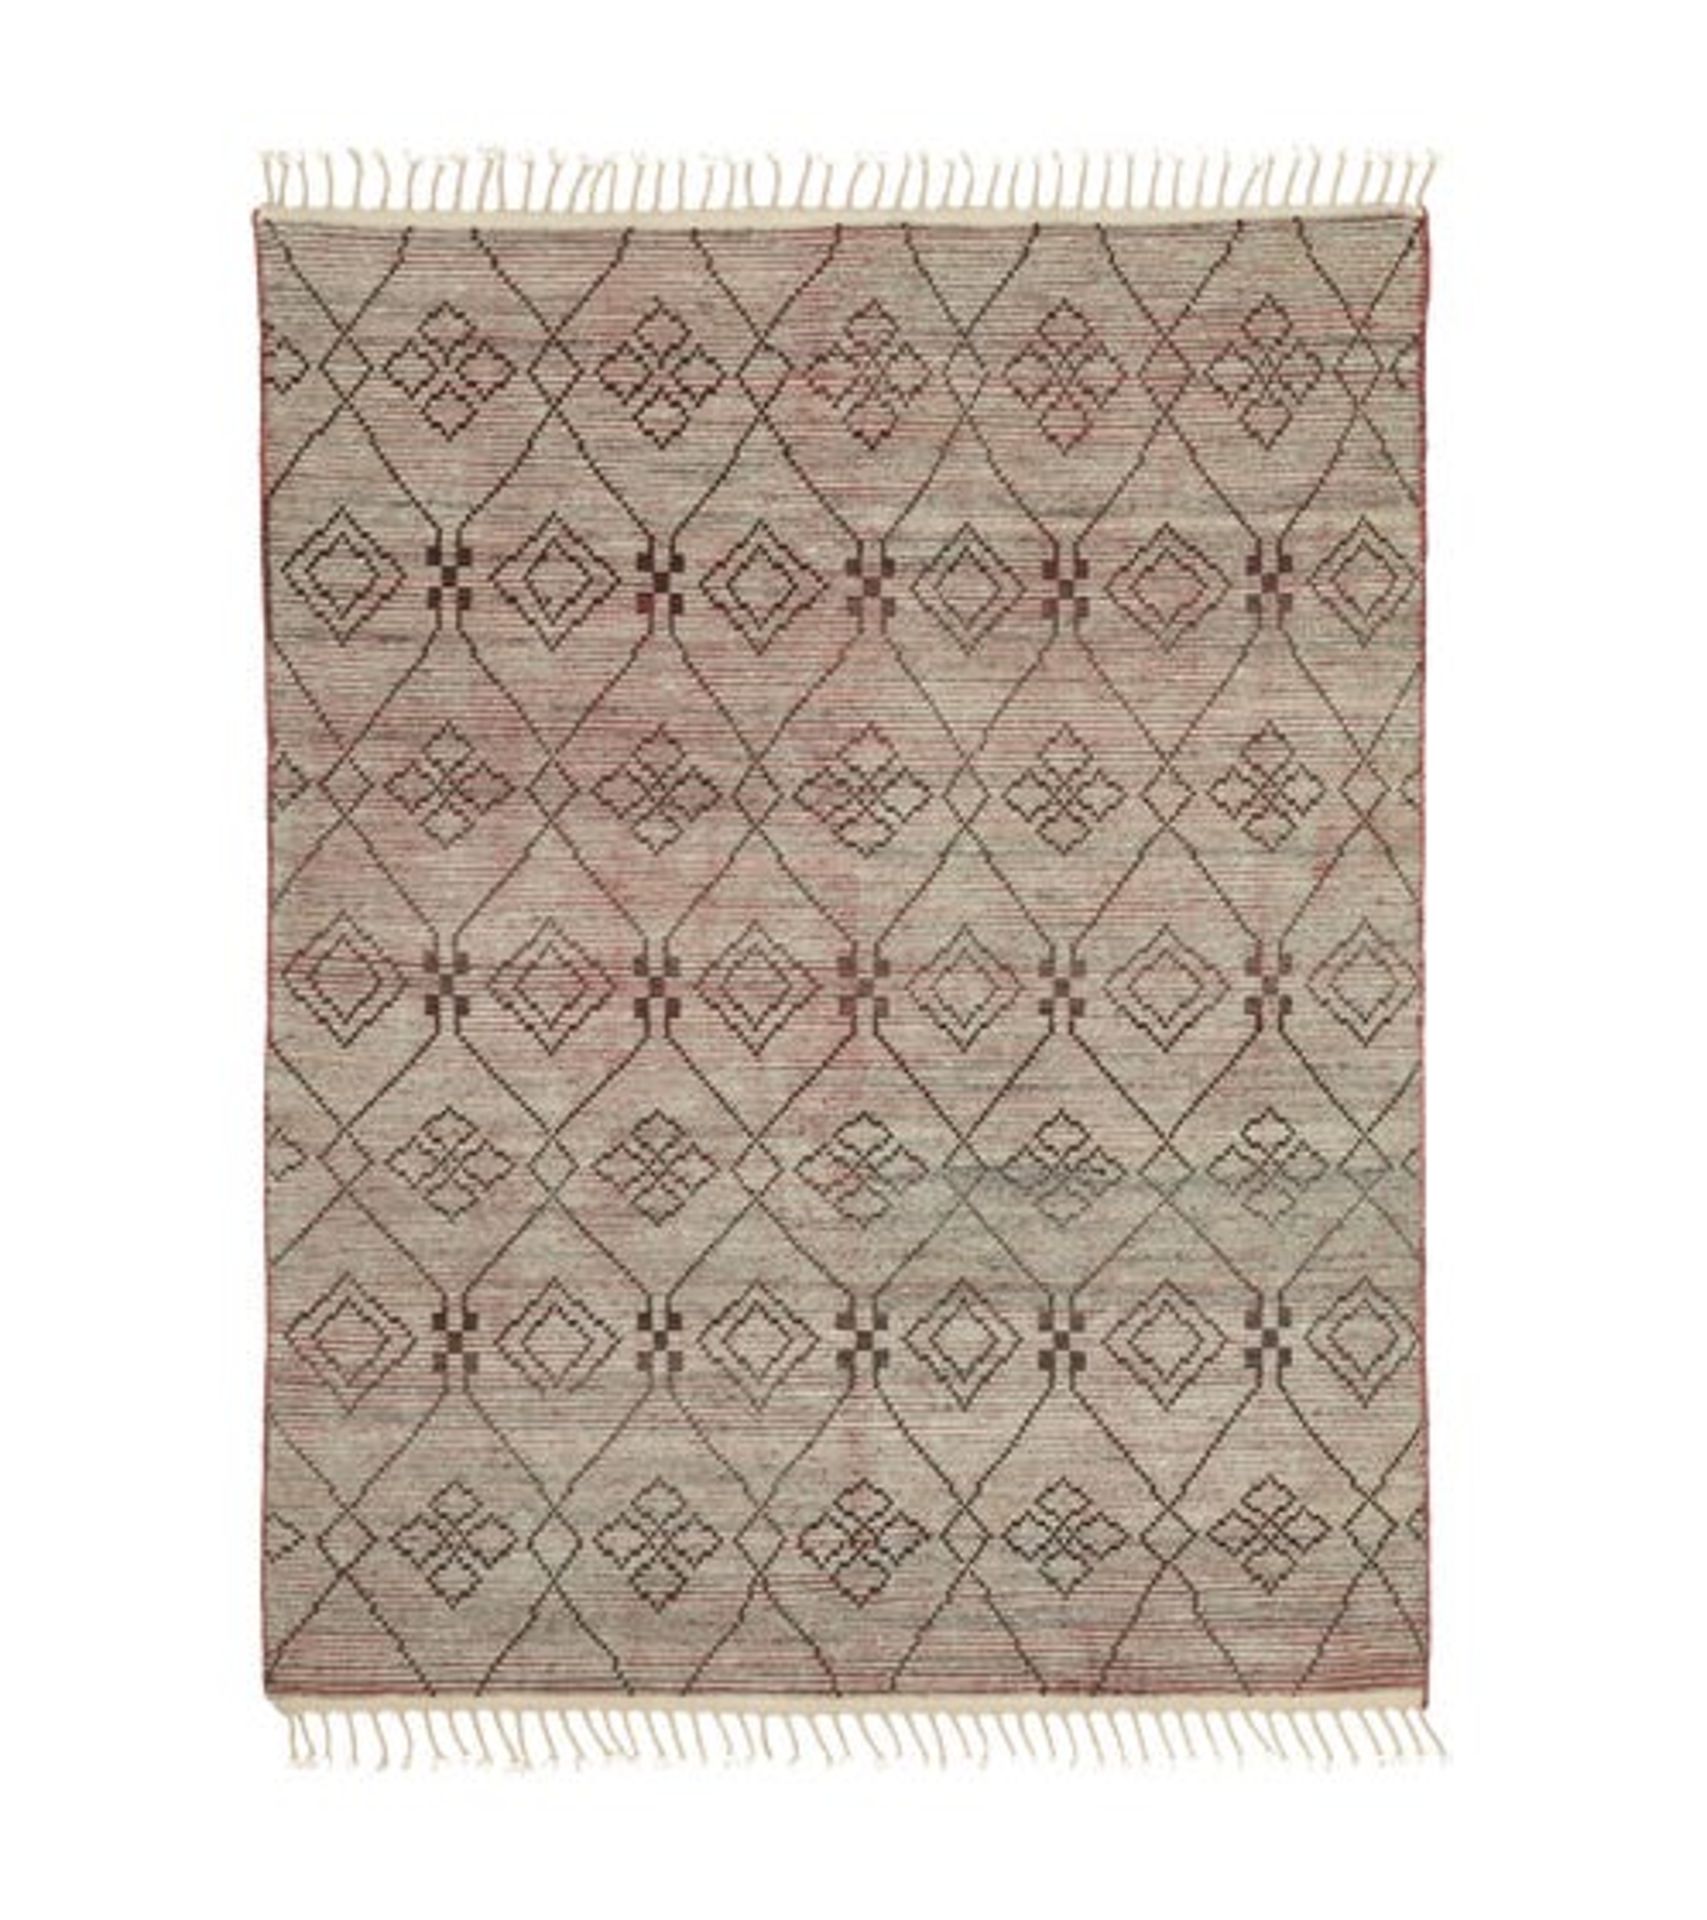 OKA Cullinan Rug Be mesmerised by this beautiful hand-knotted rug, decorated with intricate